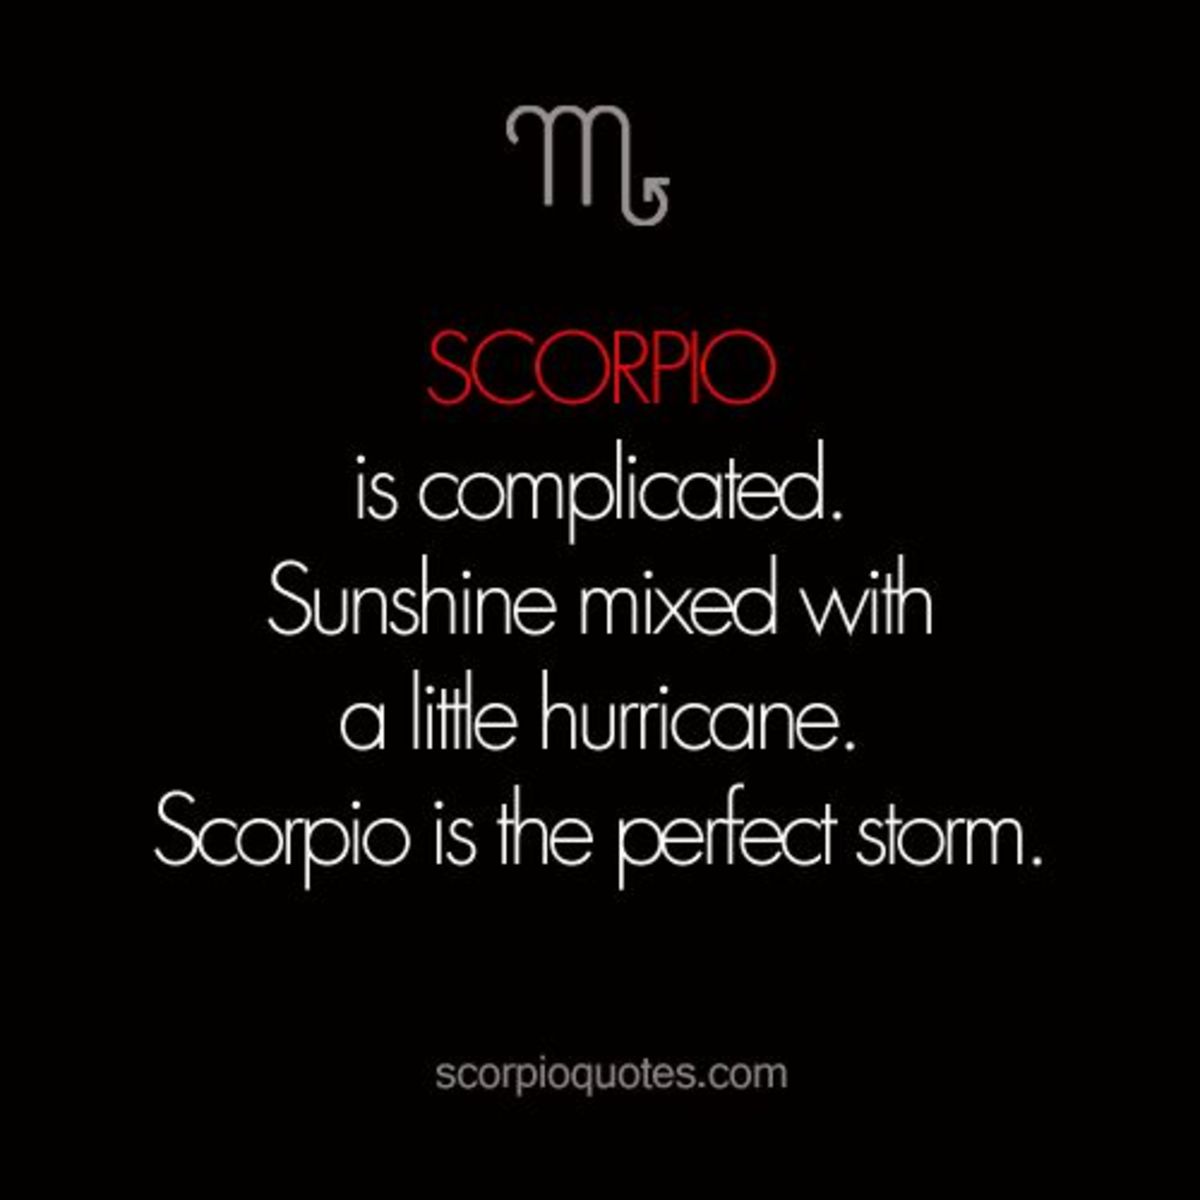 Will scorpio man come back to cancer woman